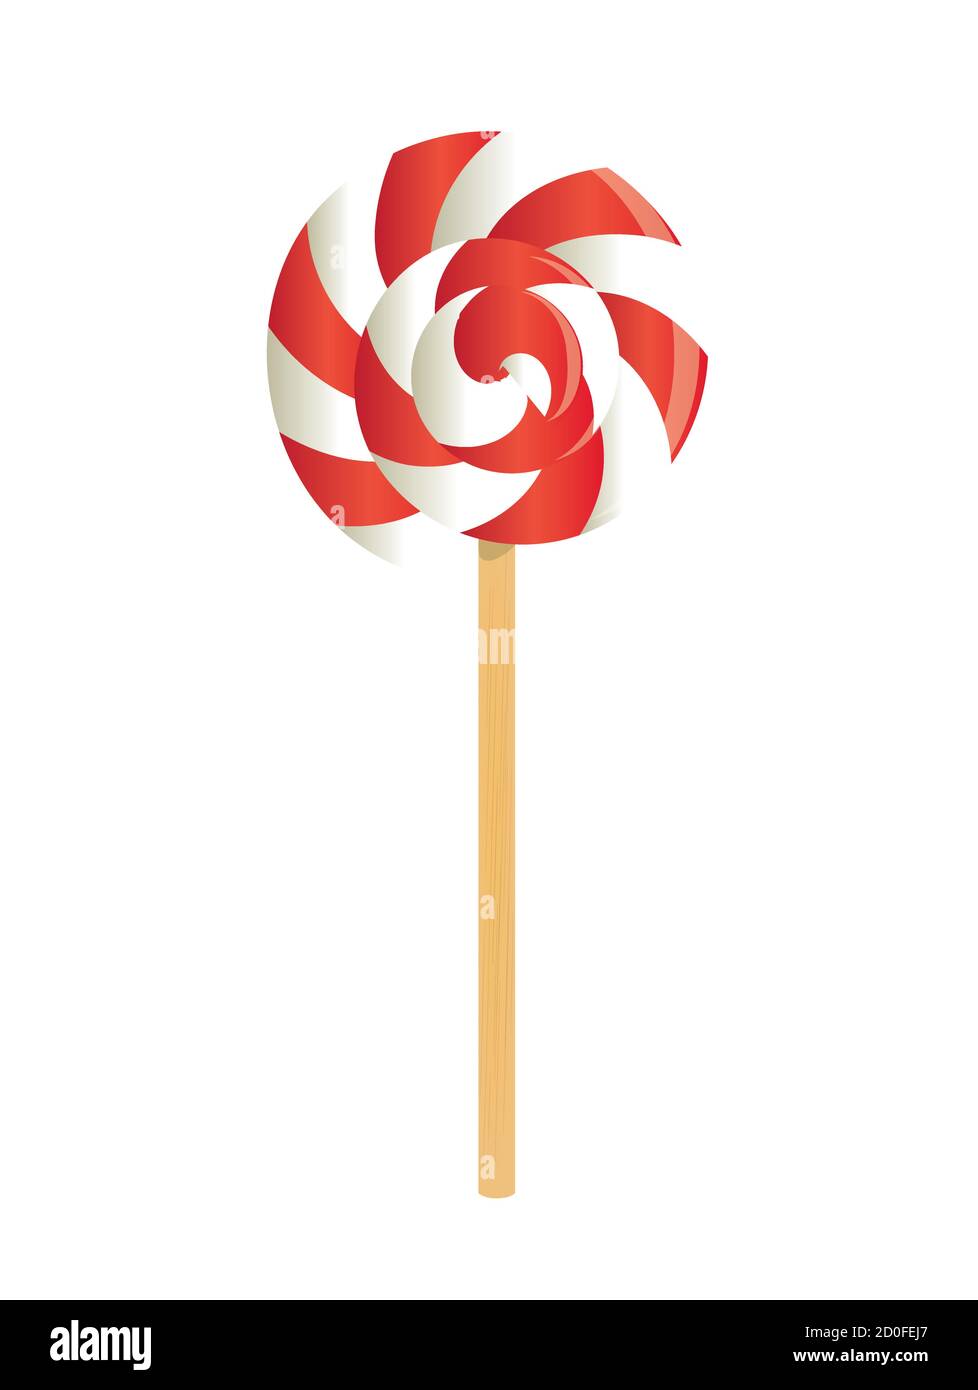 Swirl red and white lollipop. vector Stock Vector